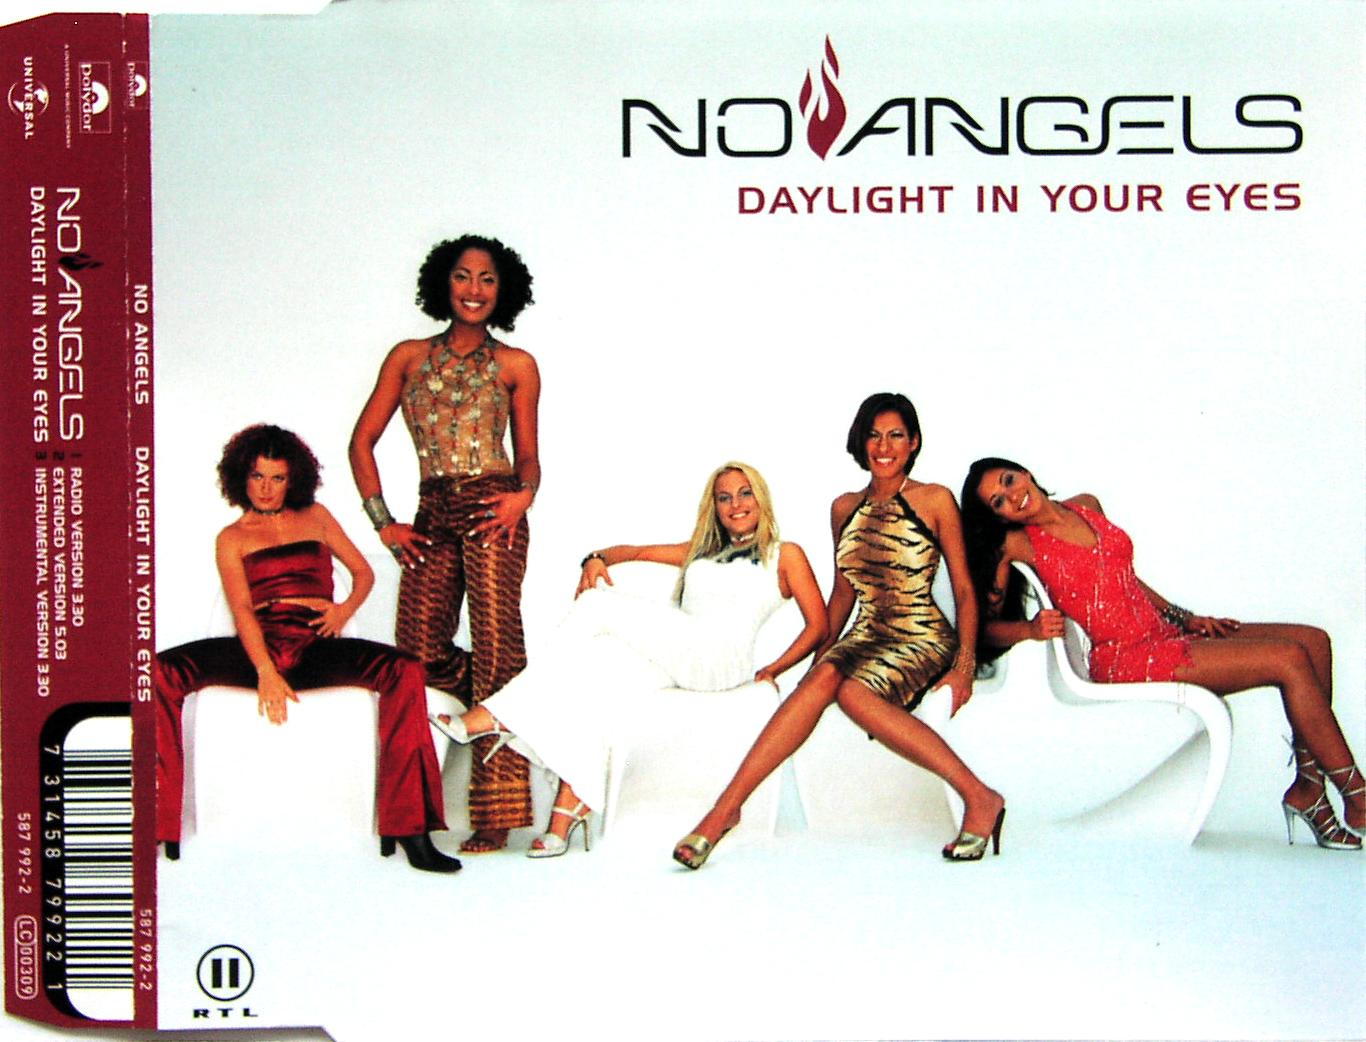 No Angels Daylight in your eyes (Vinyl Records, LP, CD) on ...